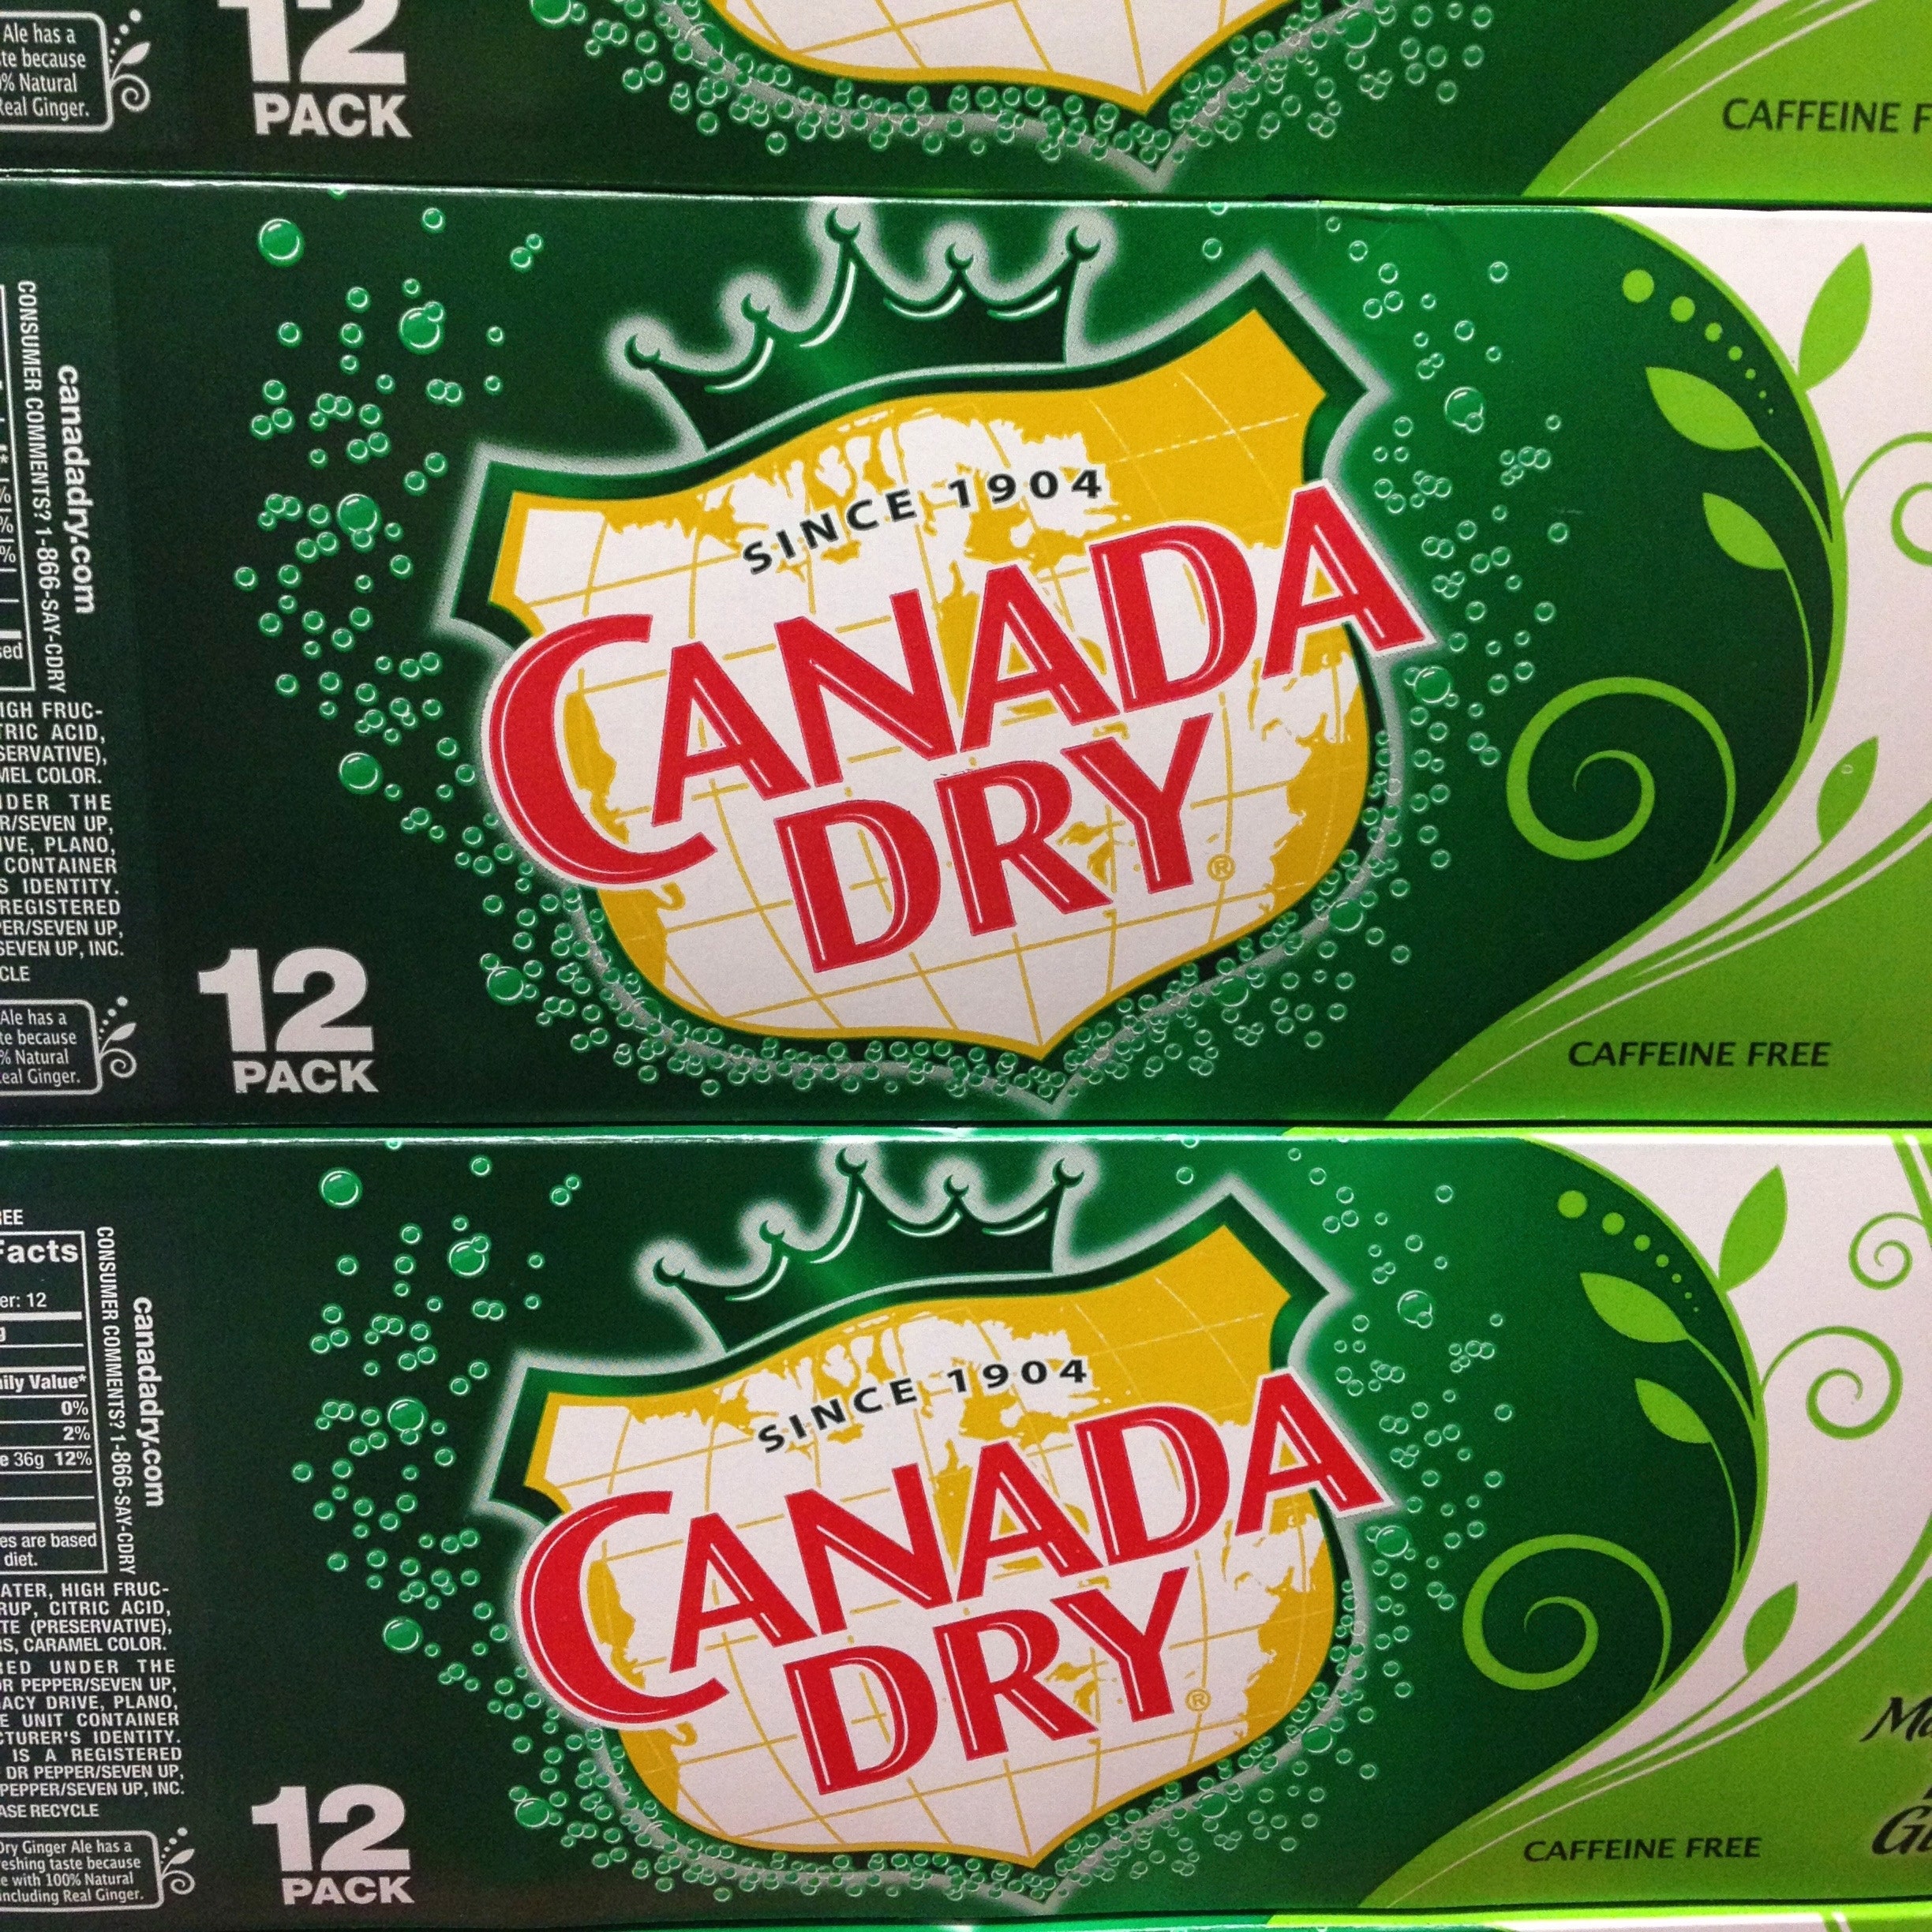 FOX NEWS: Canada Dry settles ginger ale lawsuit over 'real ginger' claims, agrees to pay over $200G